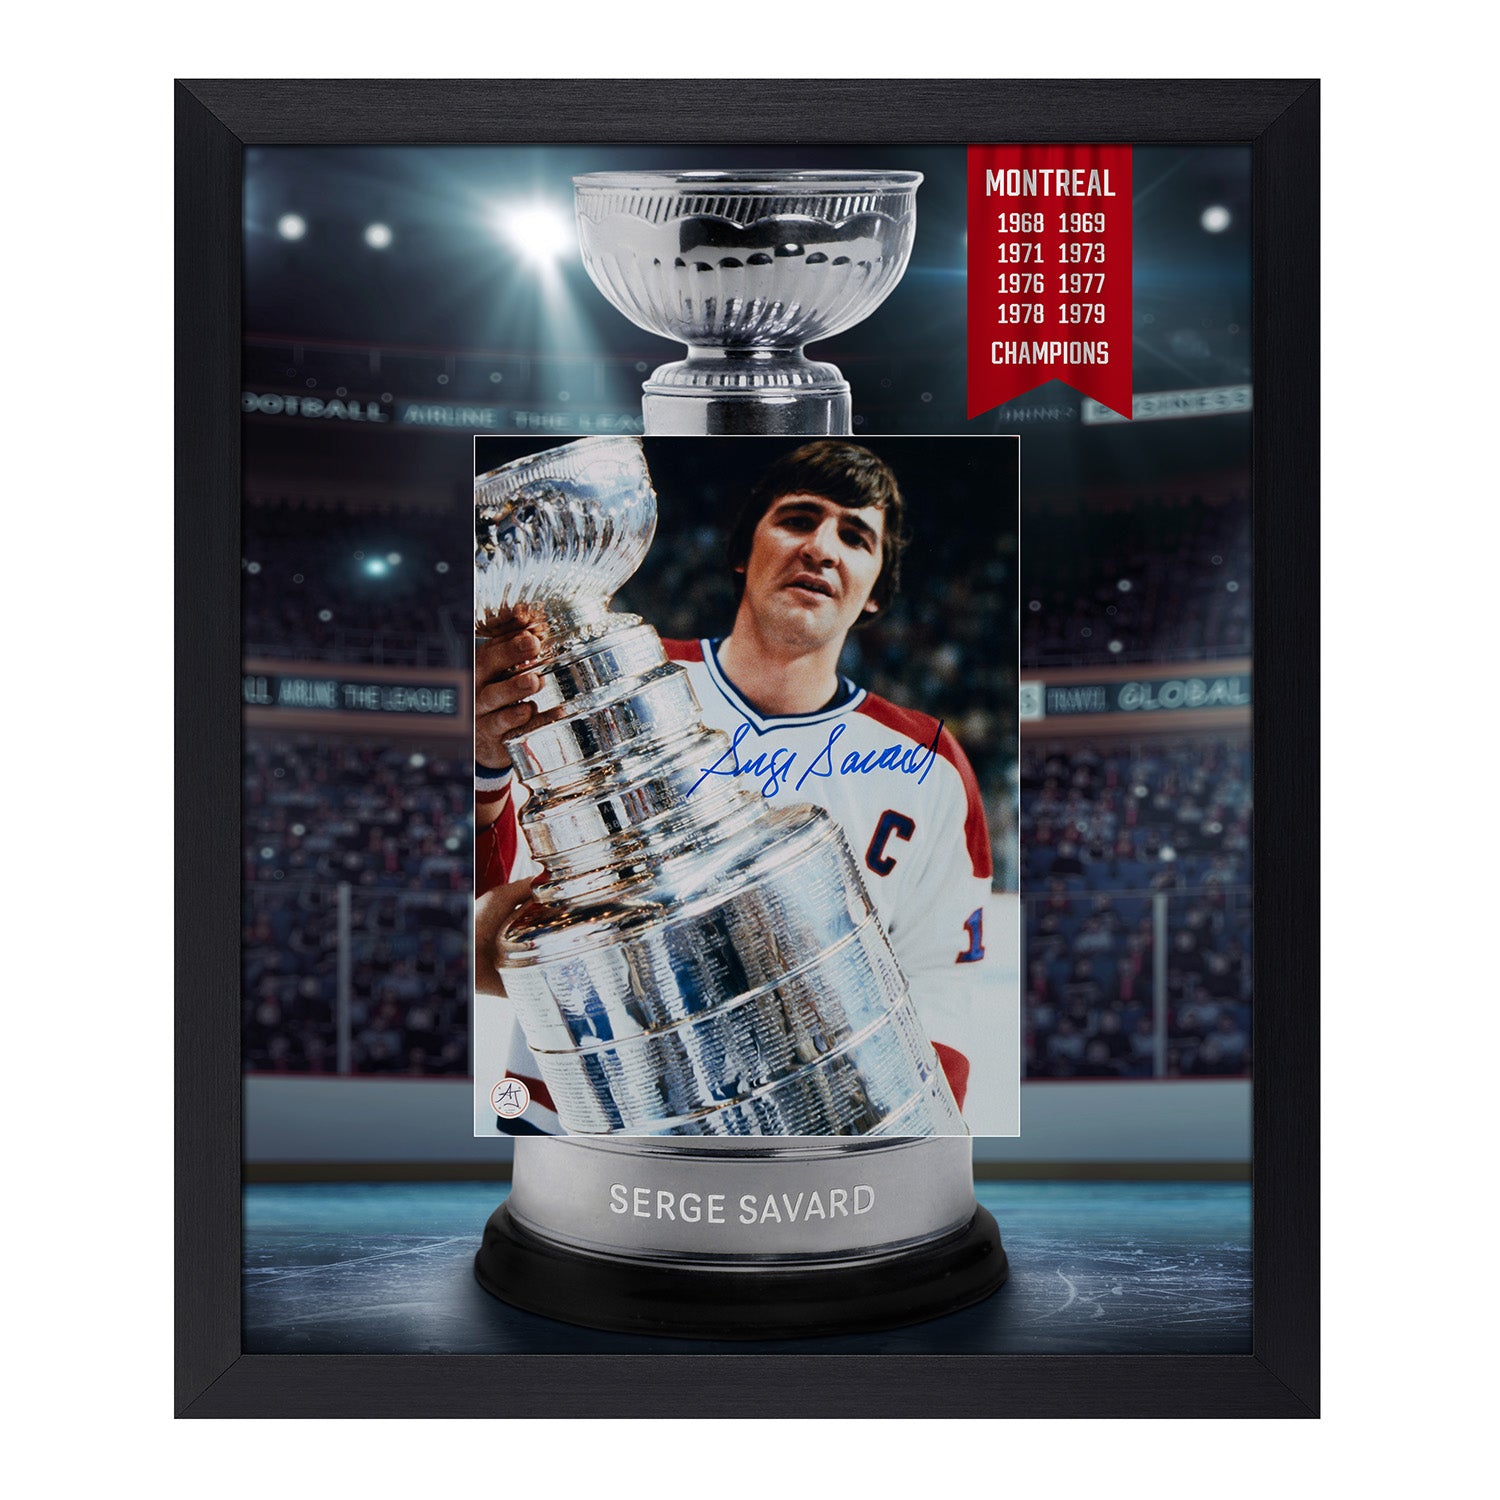 Serge Savard Signed Montreal Canadiens Cup Champion Graphic 23x27 Frame